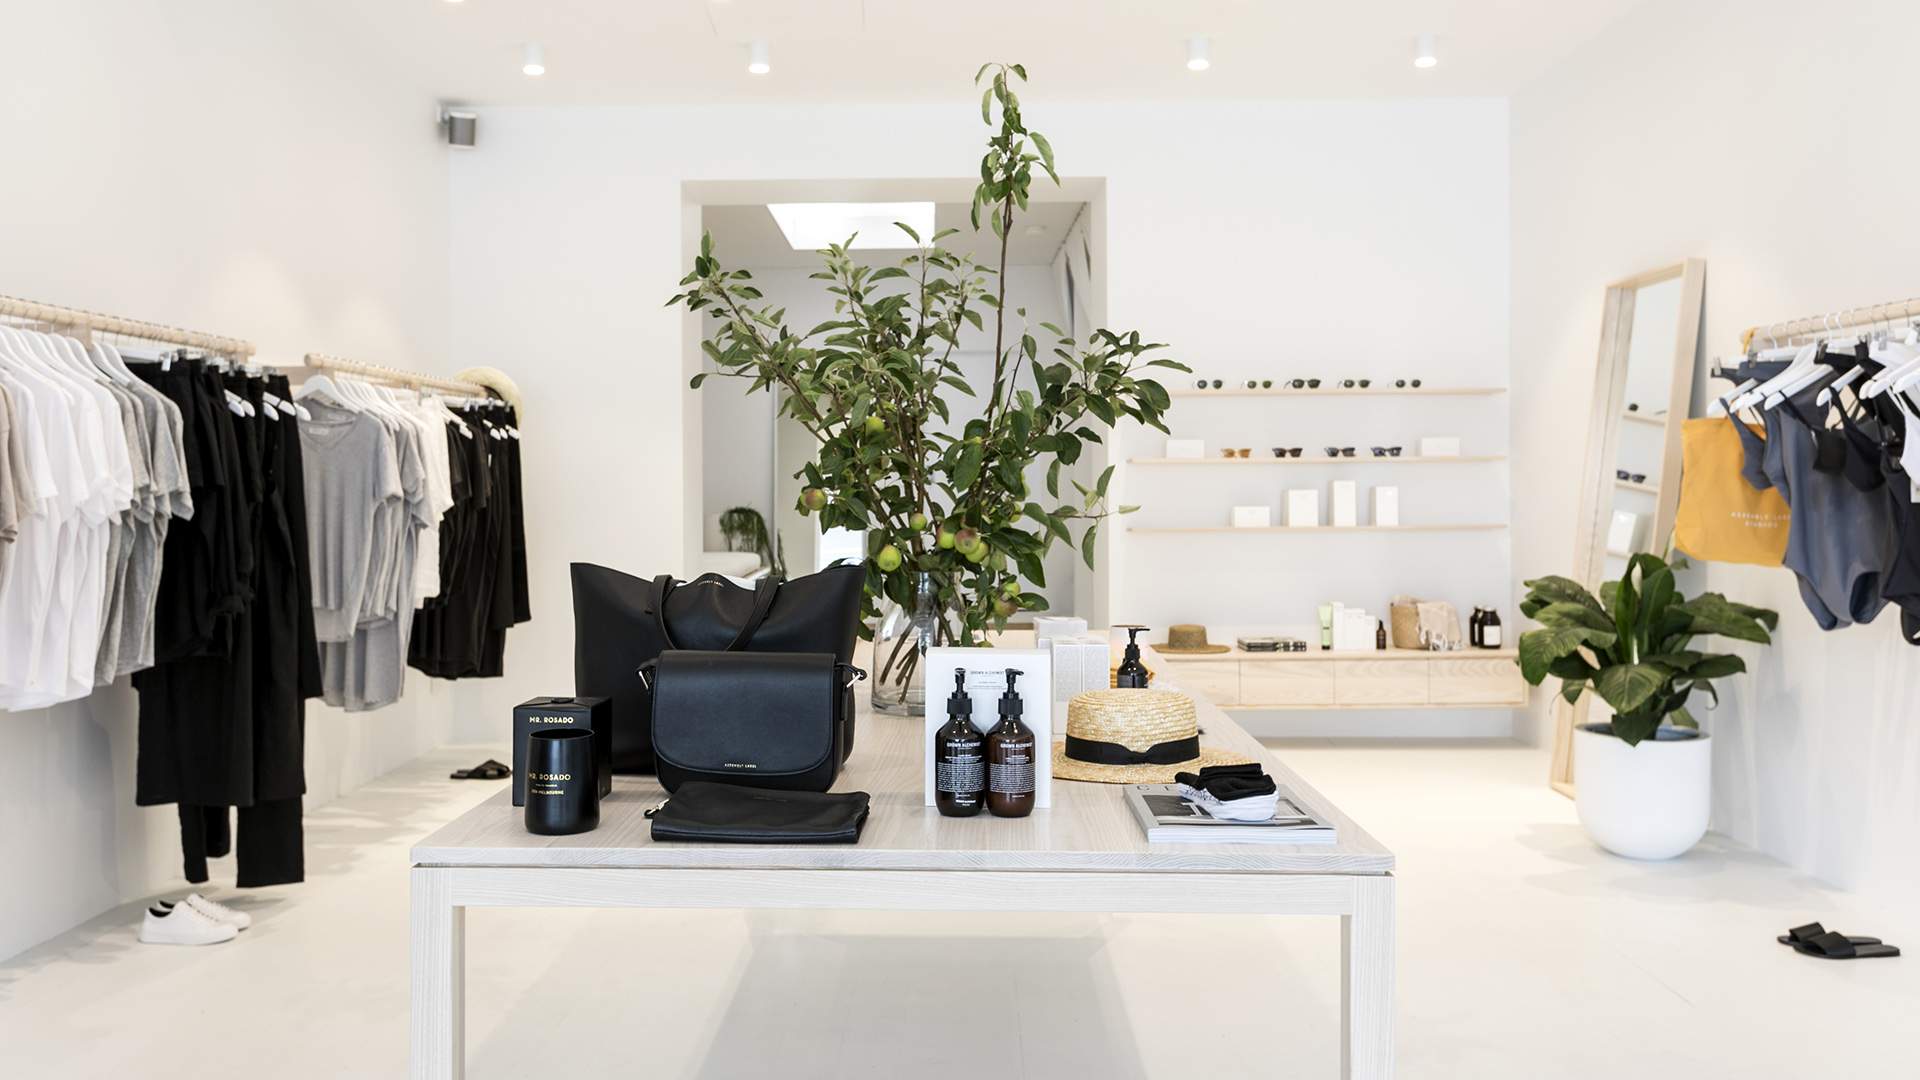 Assembly Label Expands Its Minimalist Clothing Empire to Sydney's Eastern Suburbs